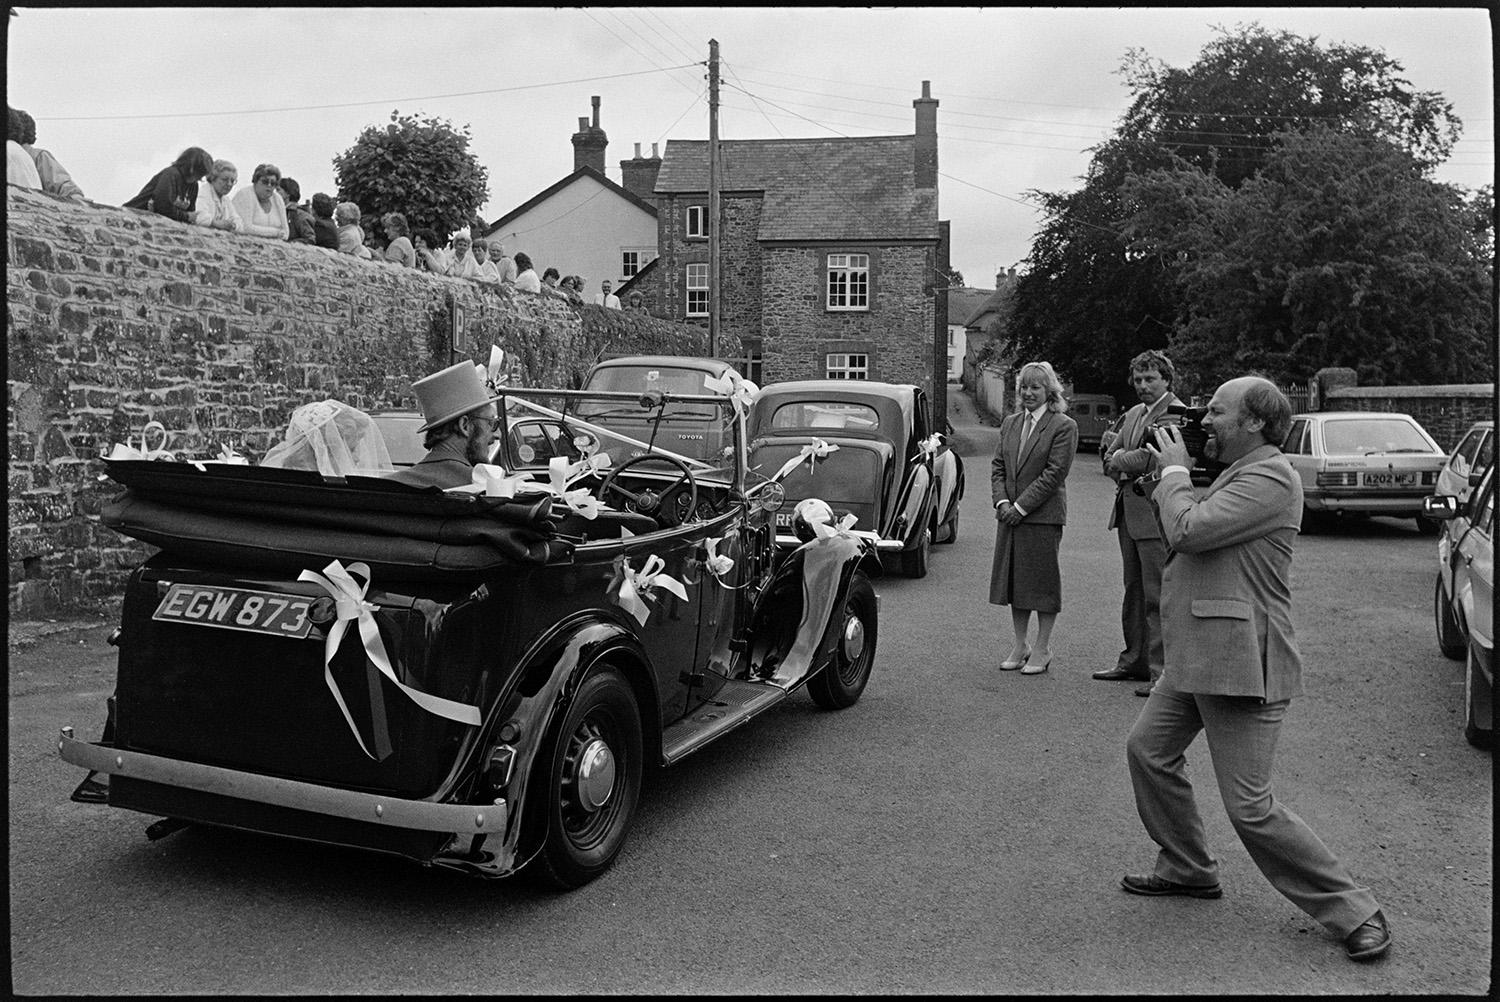 Onlookers at wedding, bride and groom arriving and leaving church in vintage car.
[A bride with her father arriving for her wedding at Chulmleigh Church in a vintage car. A man is videoing them and people are looking over the church wall. ]